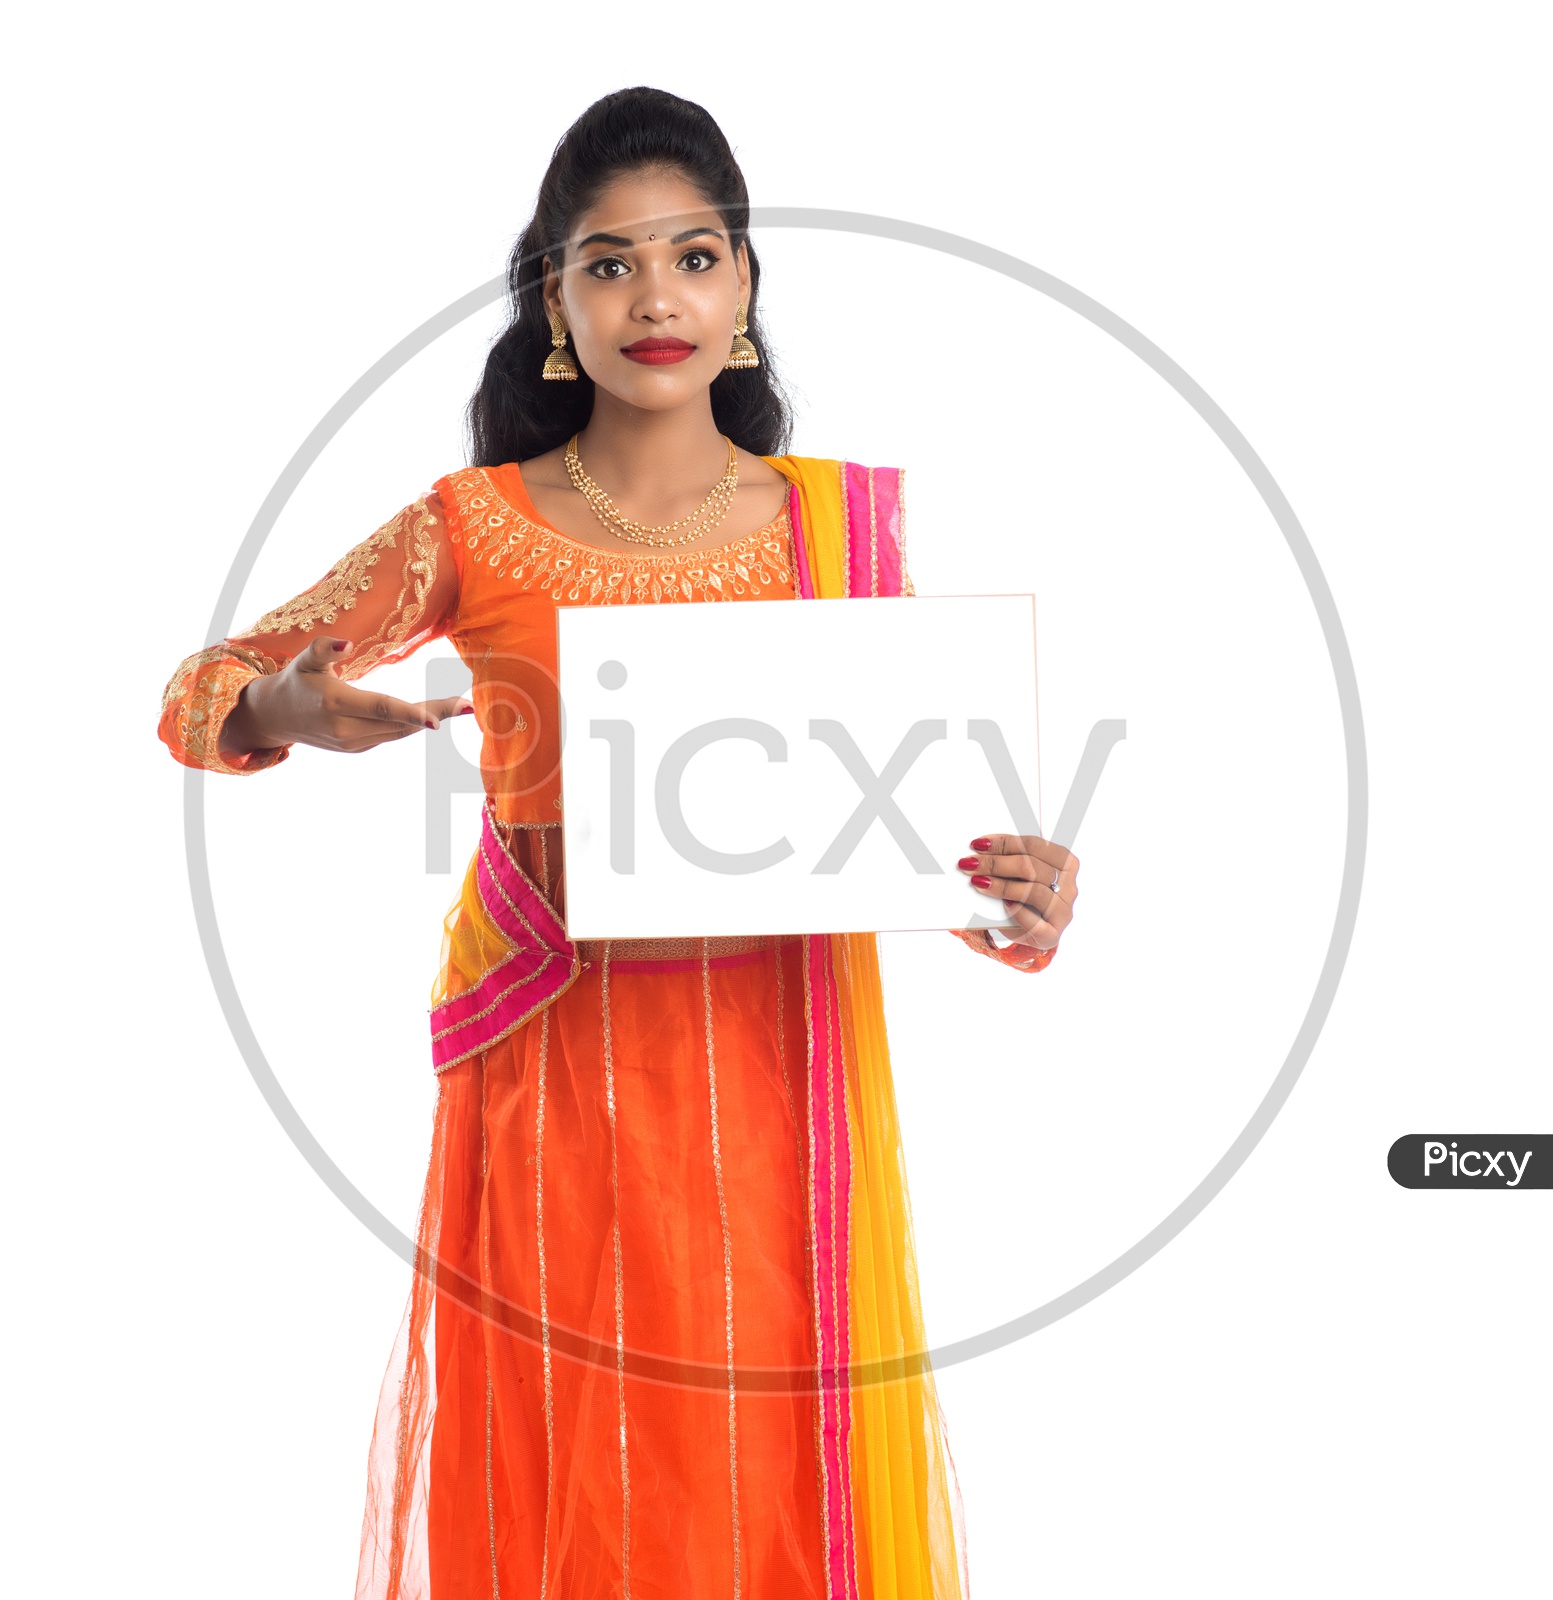 A young pretty Indian woman holding a blank white board or card